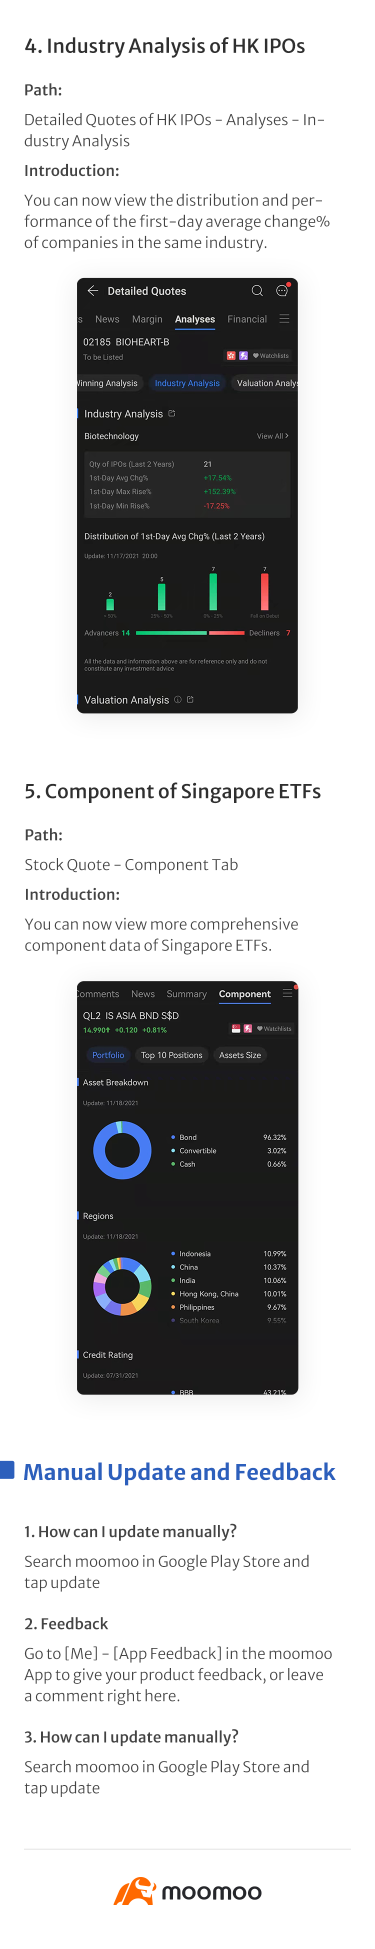 「What's New: OTC Stock Screener And Top Holders of A-Shares Viewable in Android v11.27」とは？